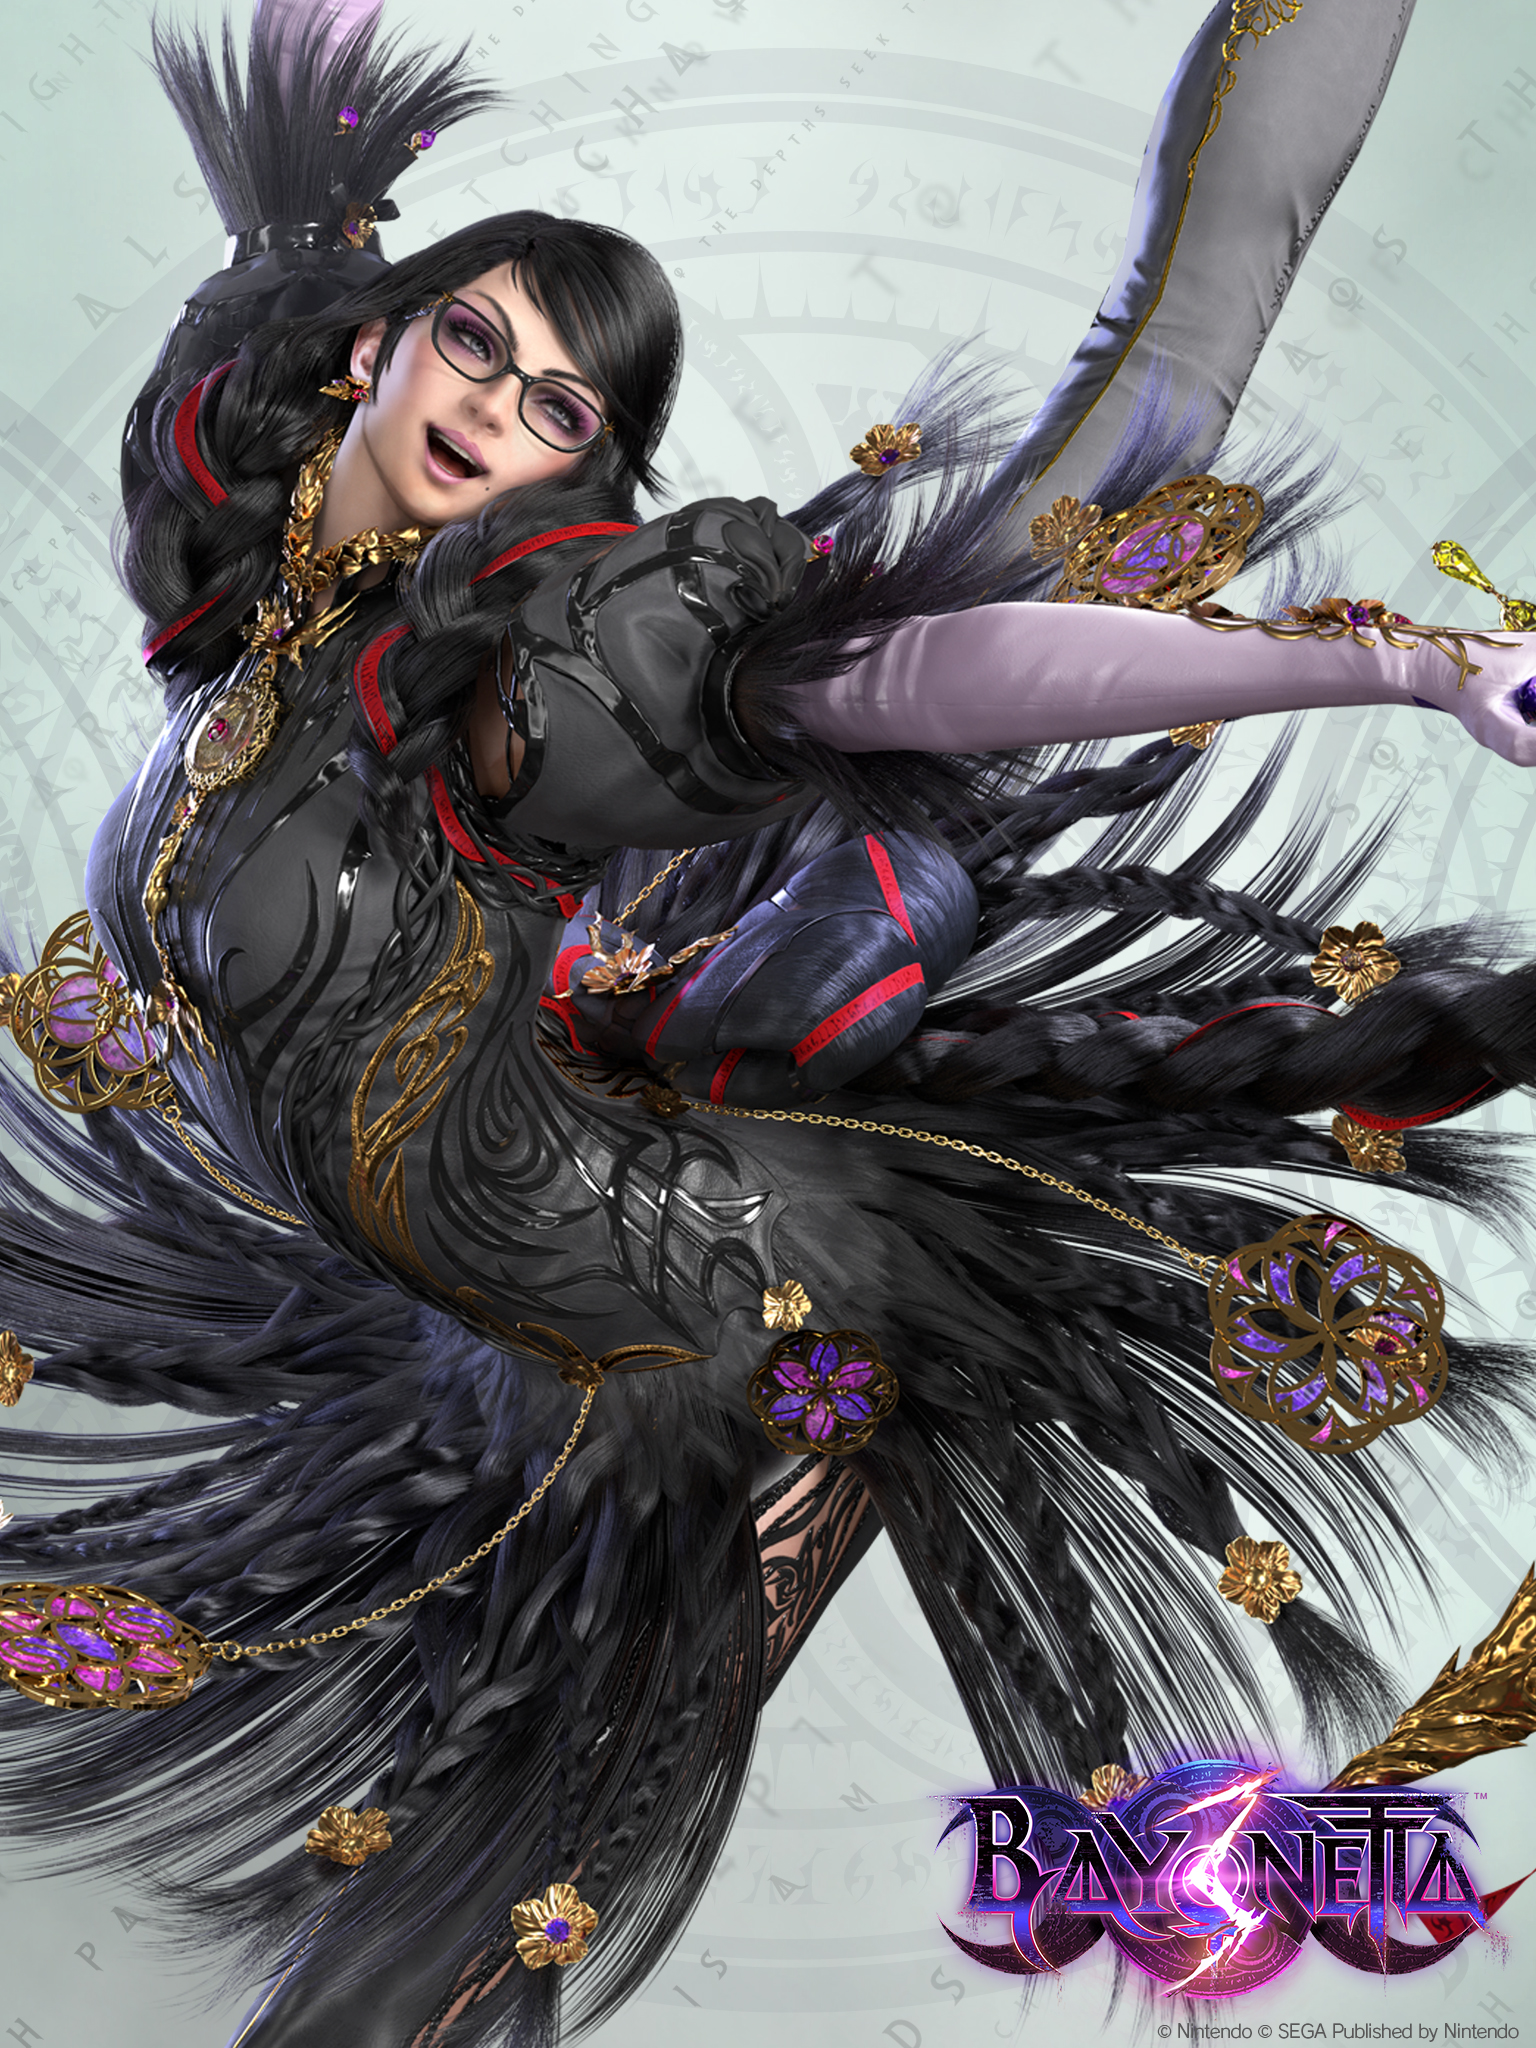 Celebrate Bayonetta 3's Release with Exclusive Wallpapers! | PlatinumGames  Official Blog